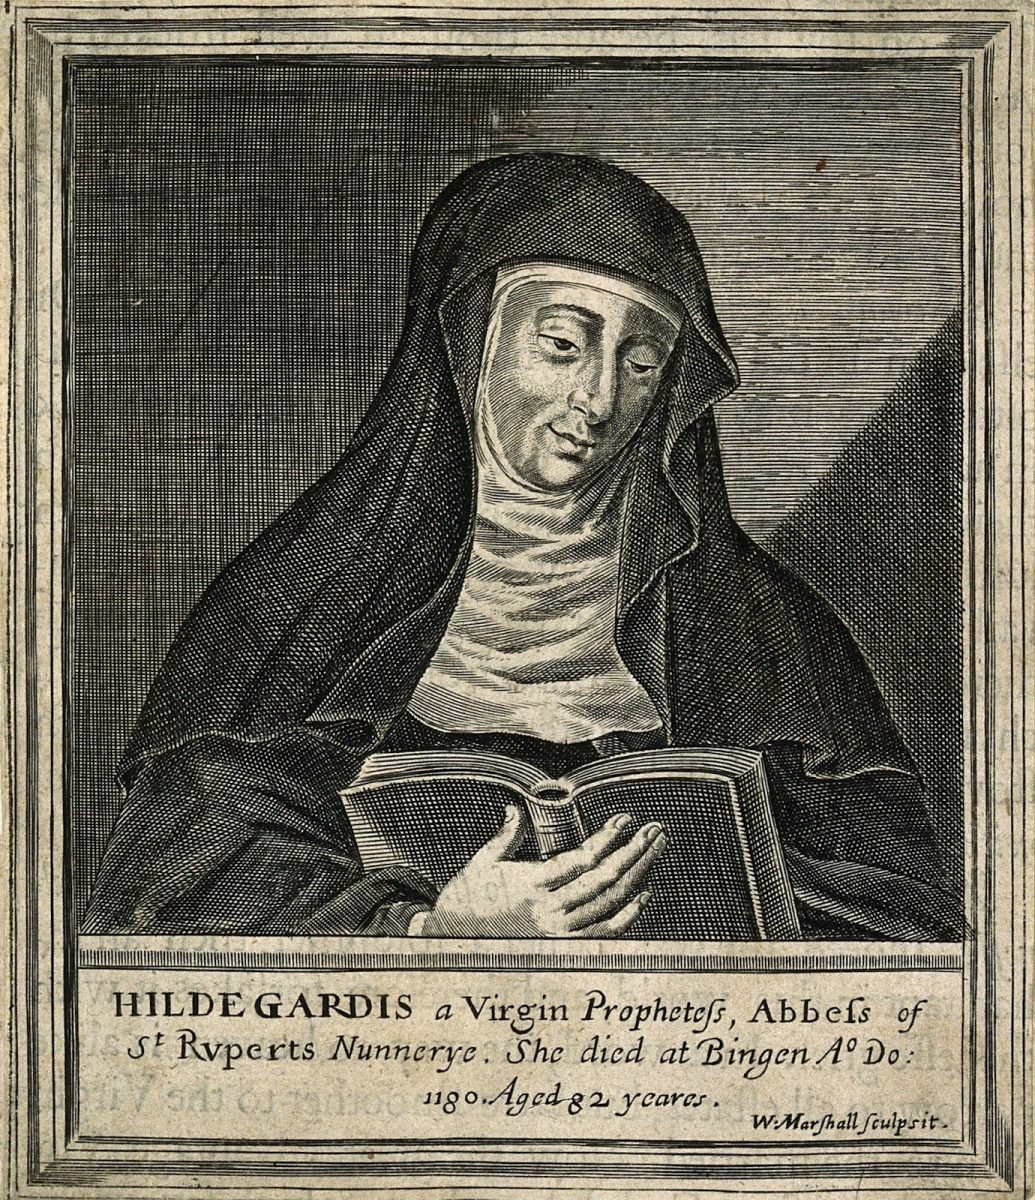 “Dare to declare who you are. It is not far from the shores of silence to the boundaries of speech. The path is not long, but the way is deep. You must not only walk there, you must be prepared to leap” wrote Hildegard of Bingen.
(Image Credit: William Marshall, CC BY 4.0 , via Wikimedia Commons) 